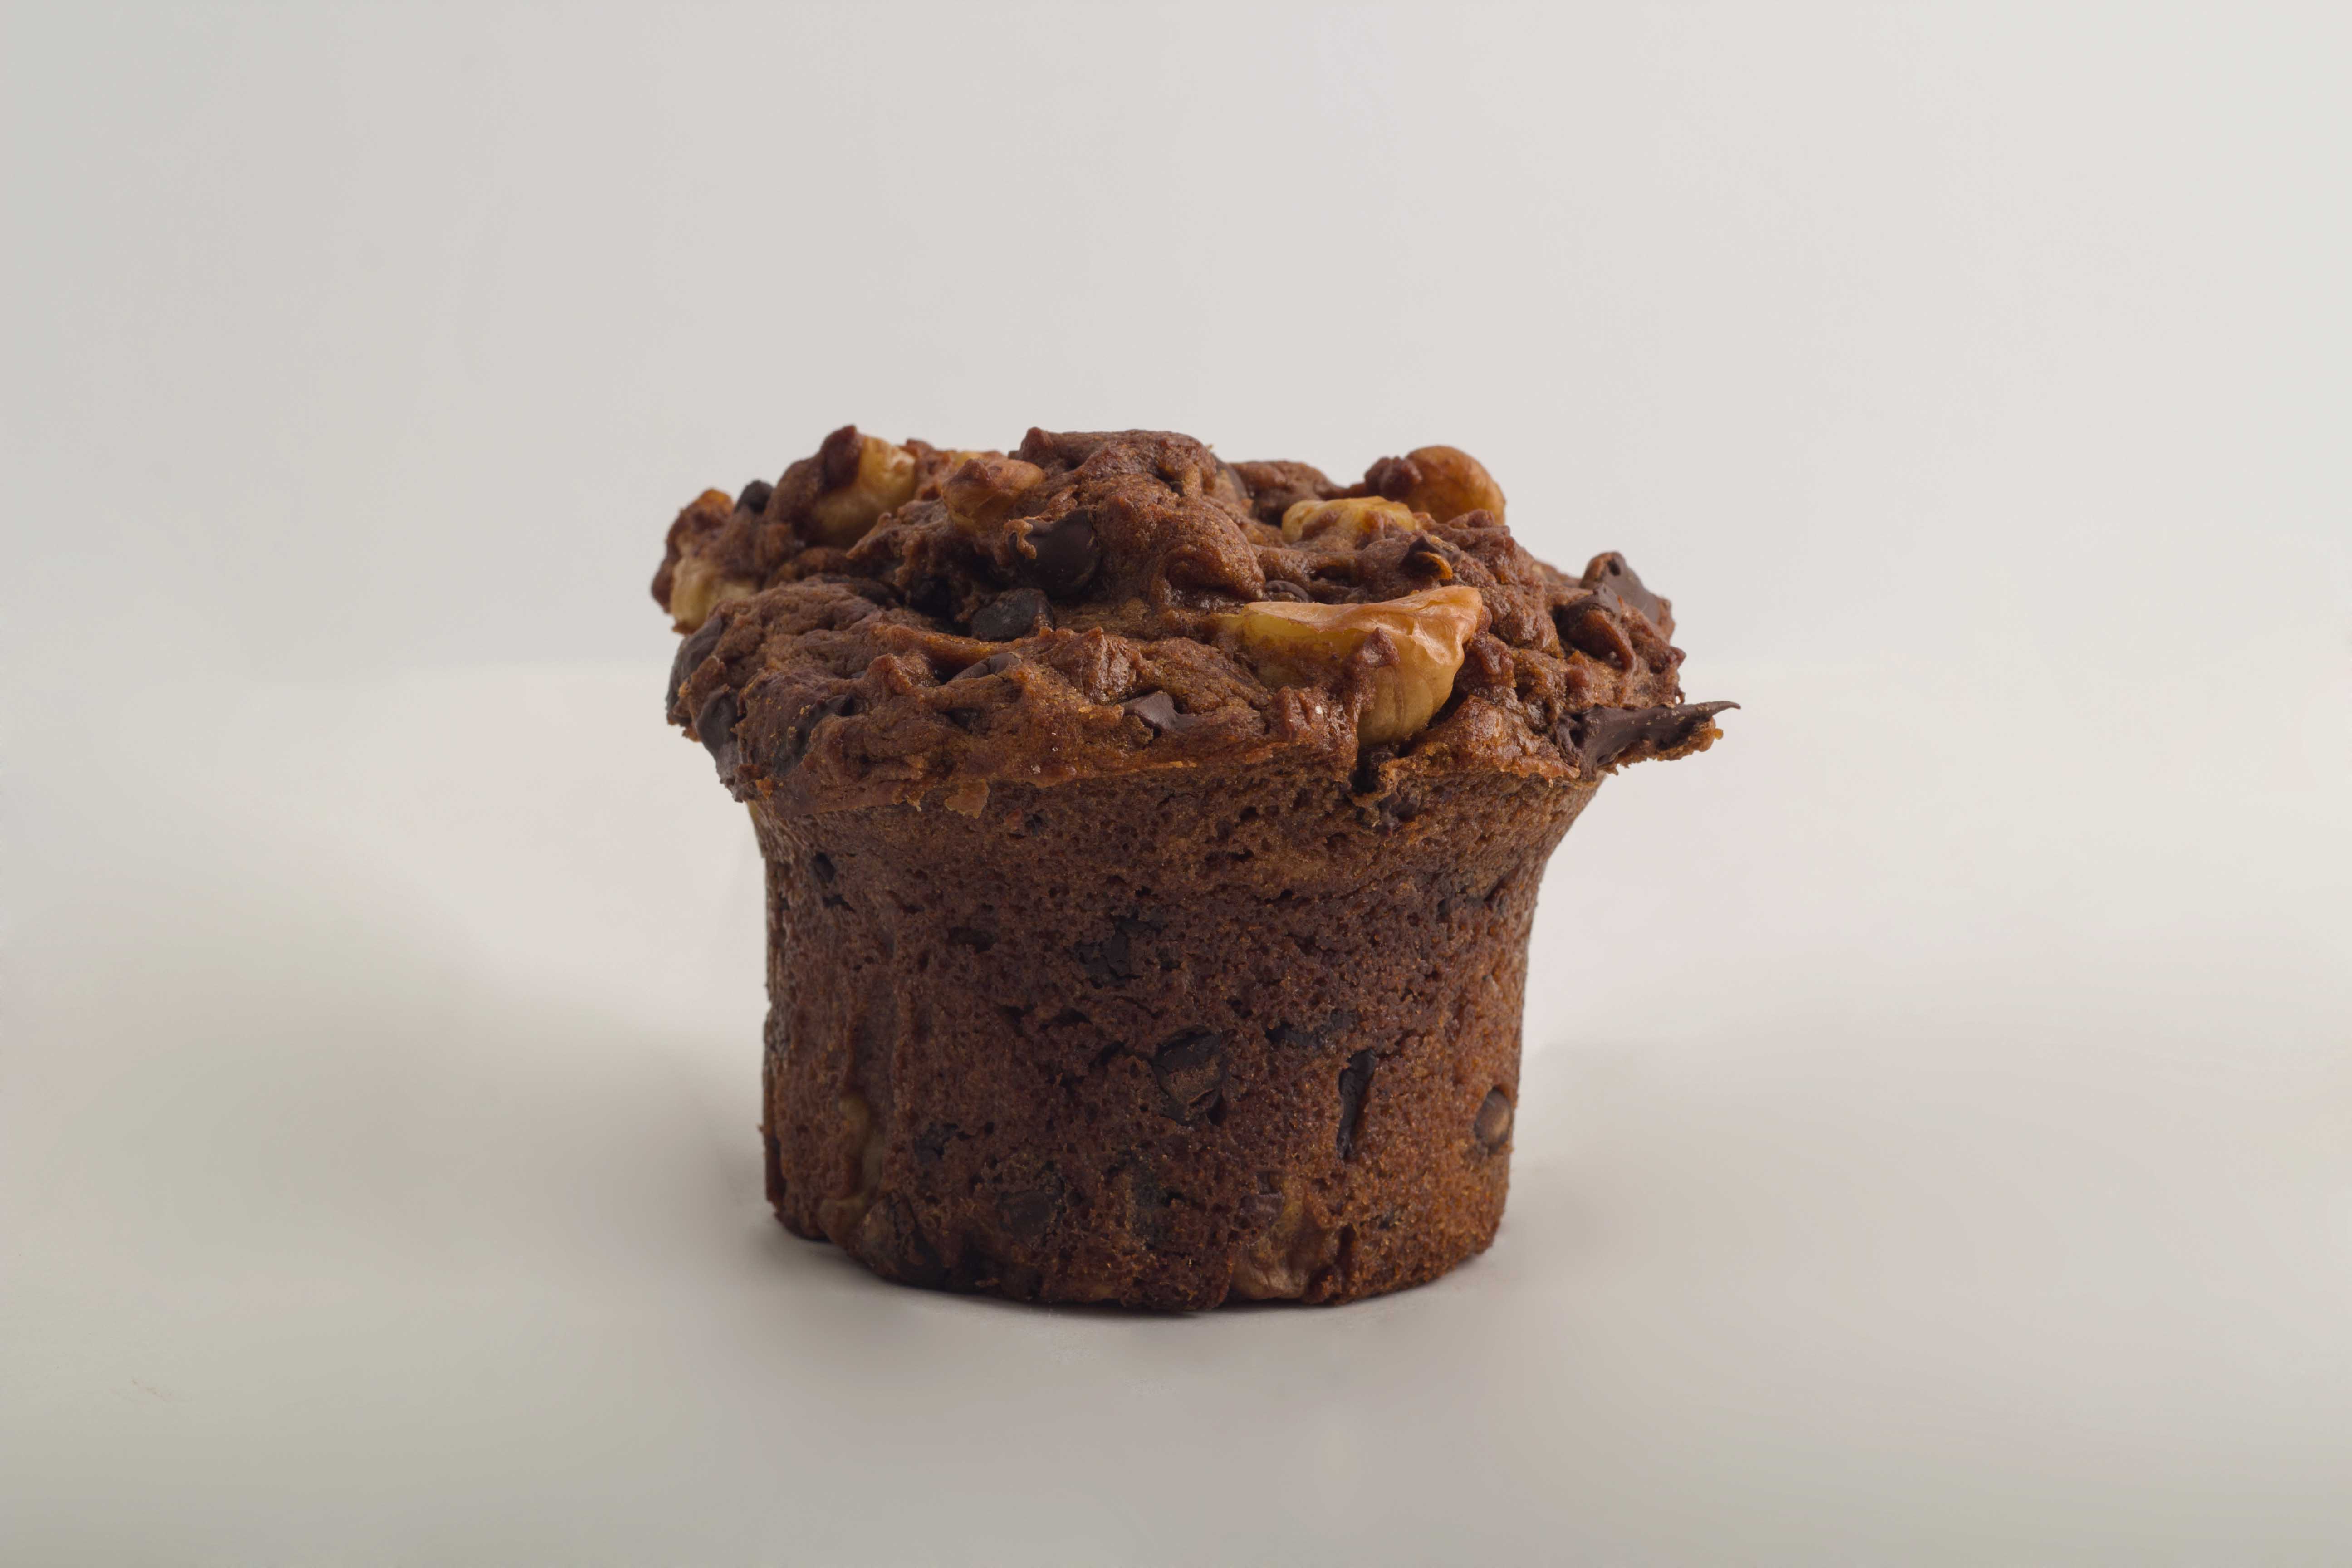 Muffin cacao con nuez